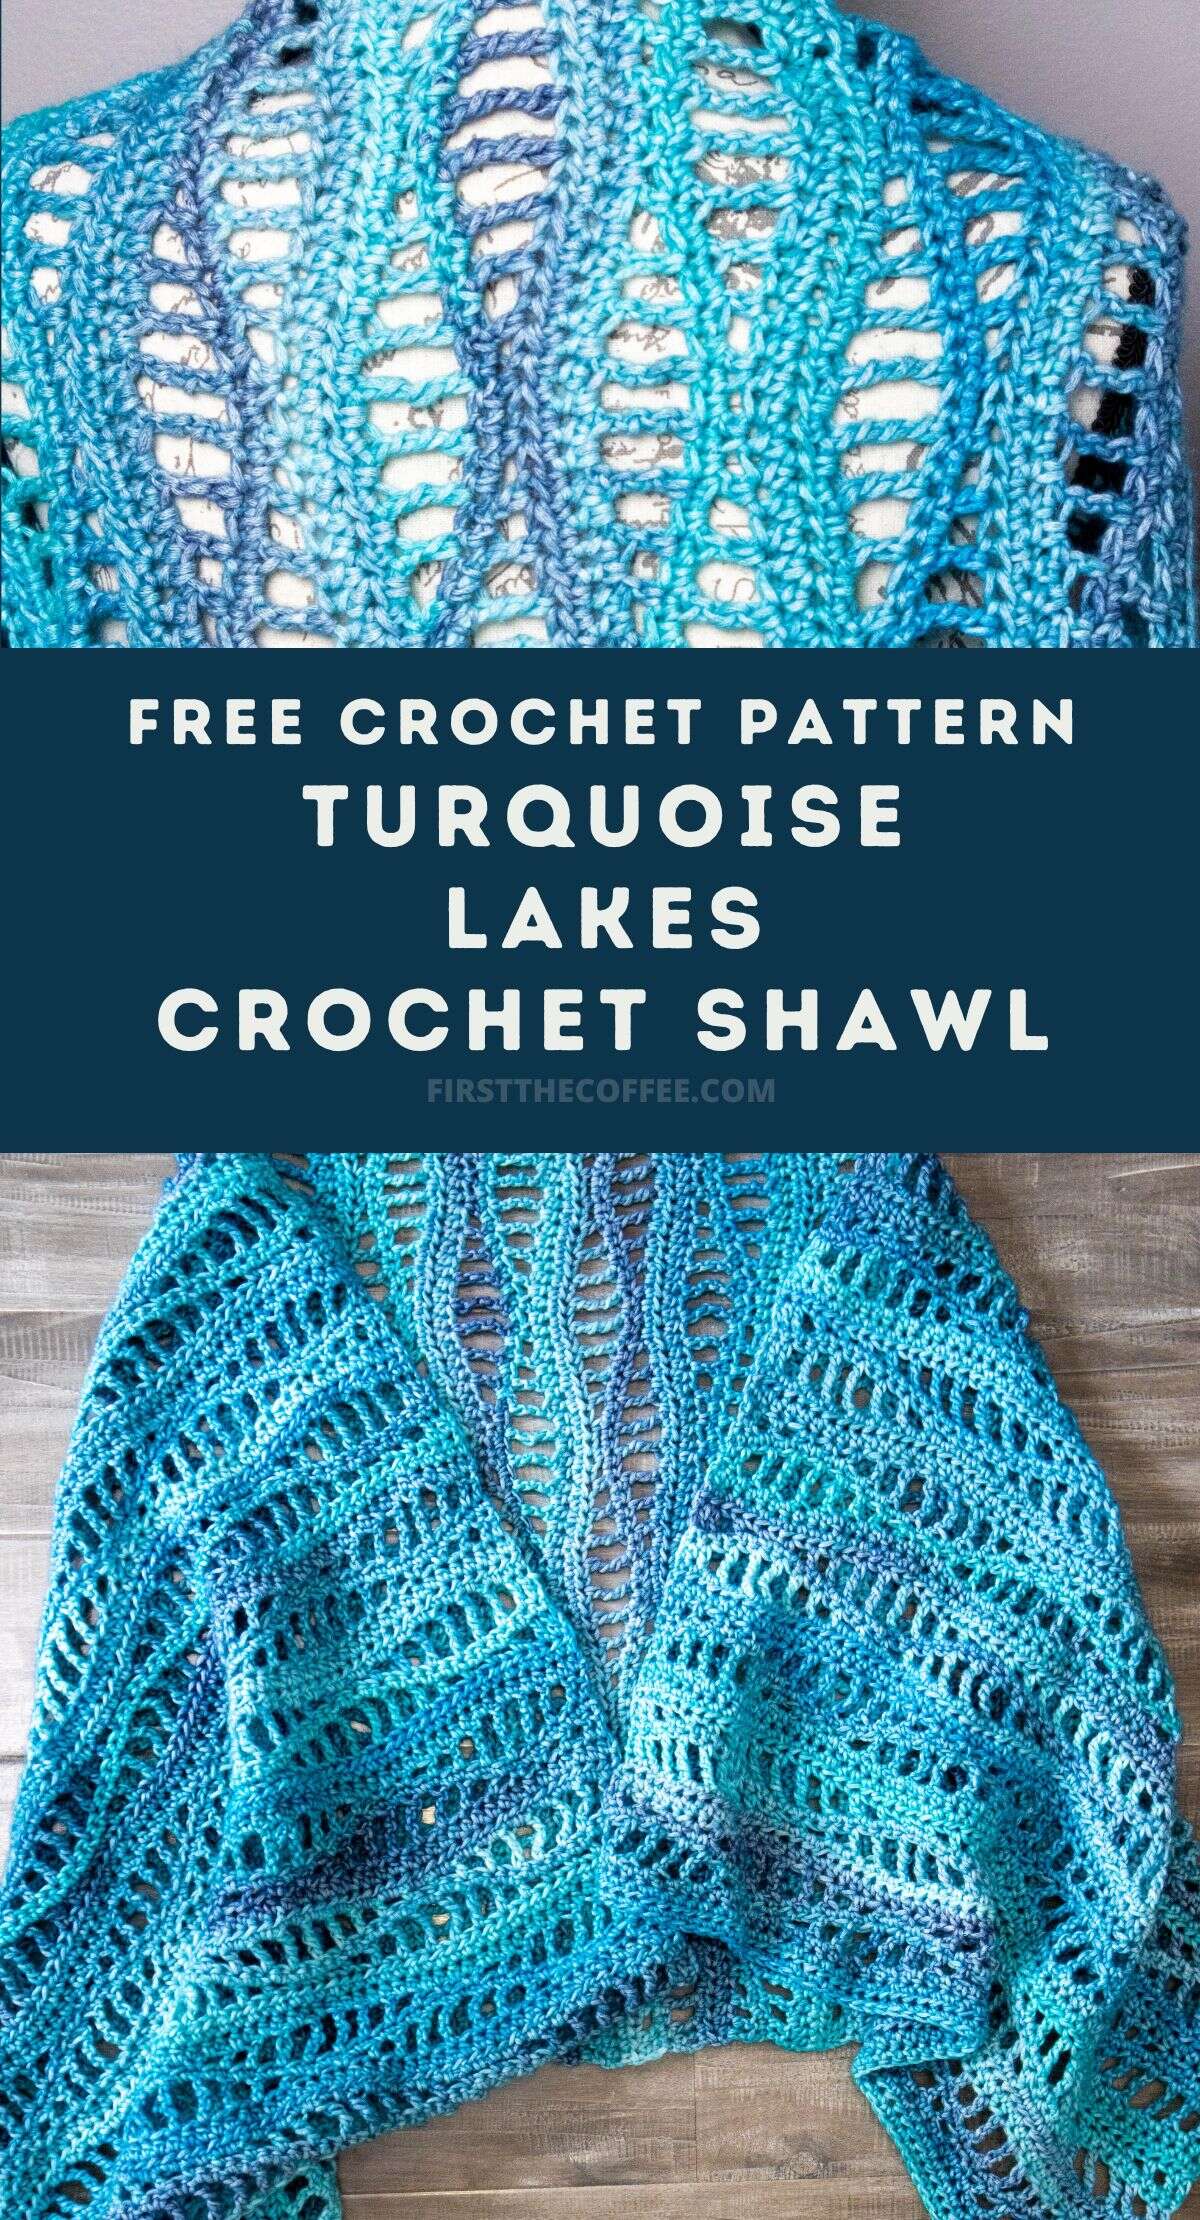 Turquoise Lakes Crochet Shawl Pattern - First The Coffee Crochet